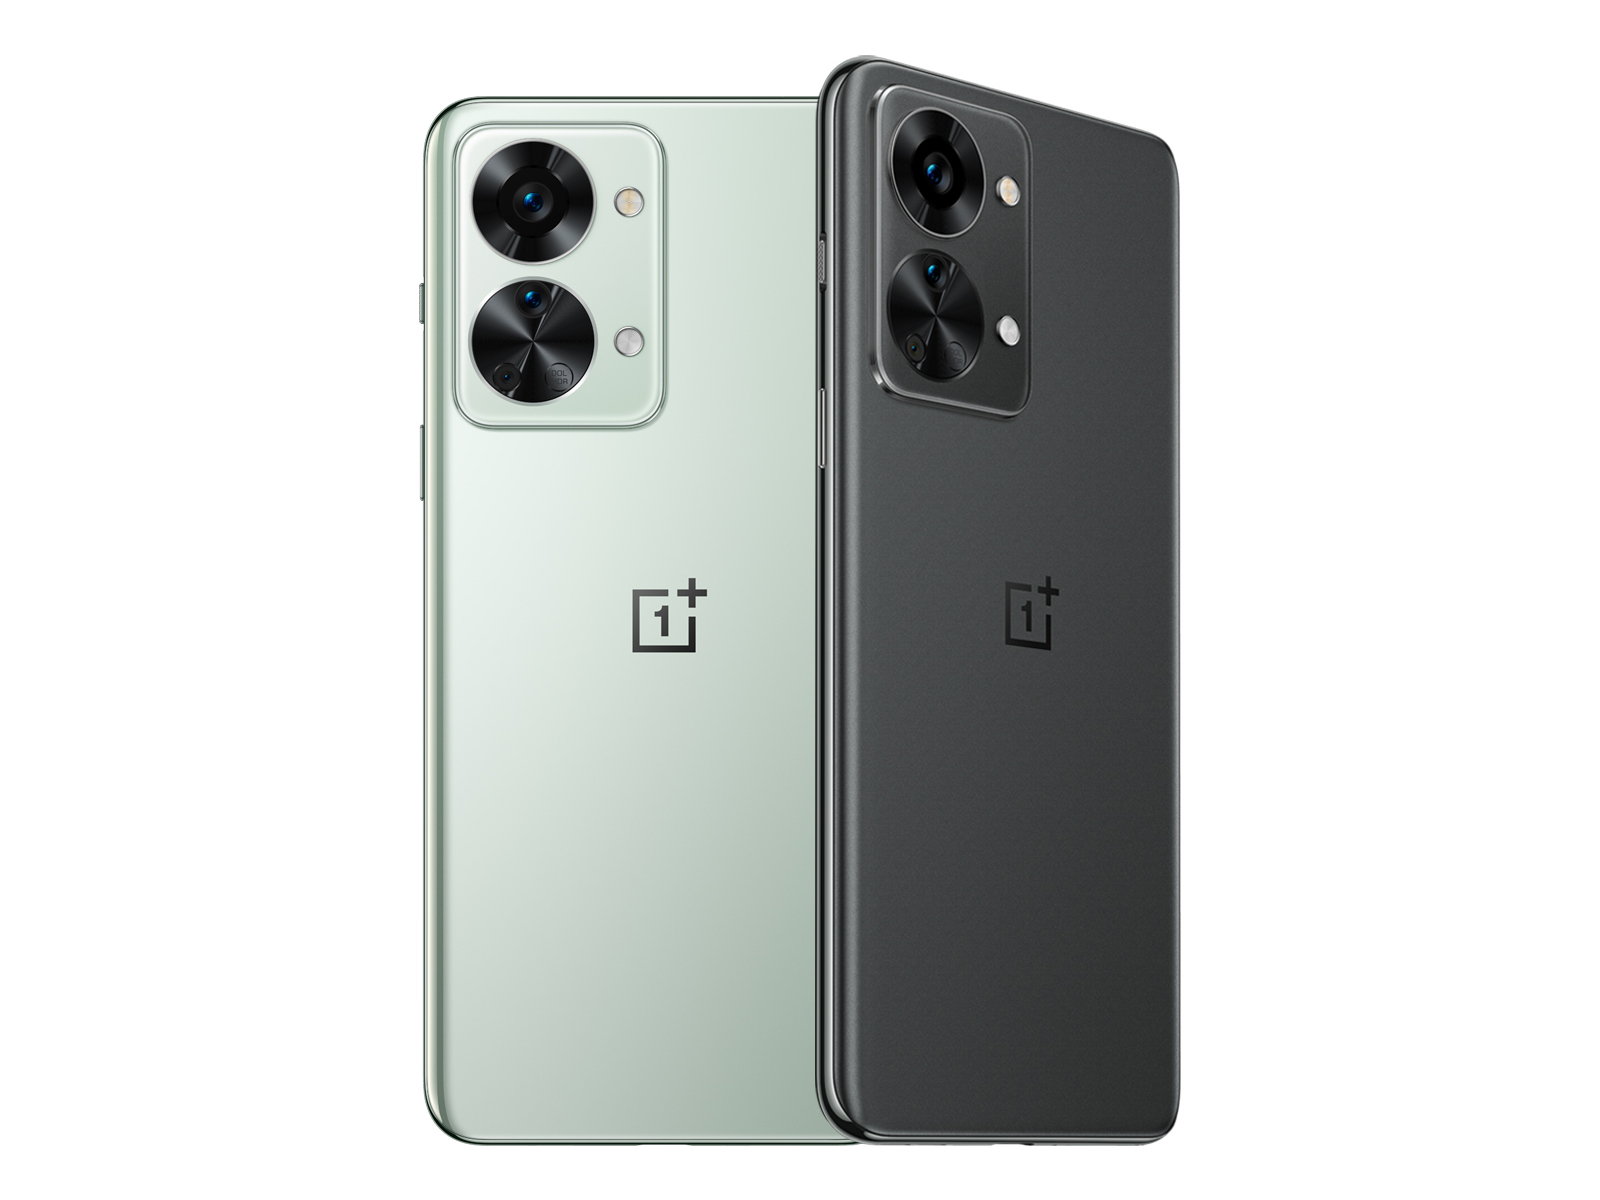 A MASTERFUL MIDRANGER GETS SMALL IMPROVEMENTS IN THE ONEPLUS NORD 2T